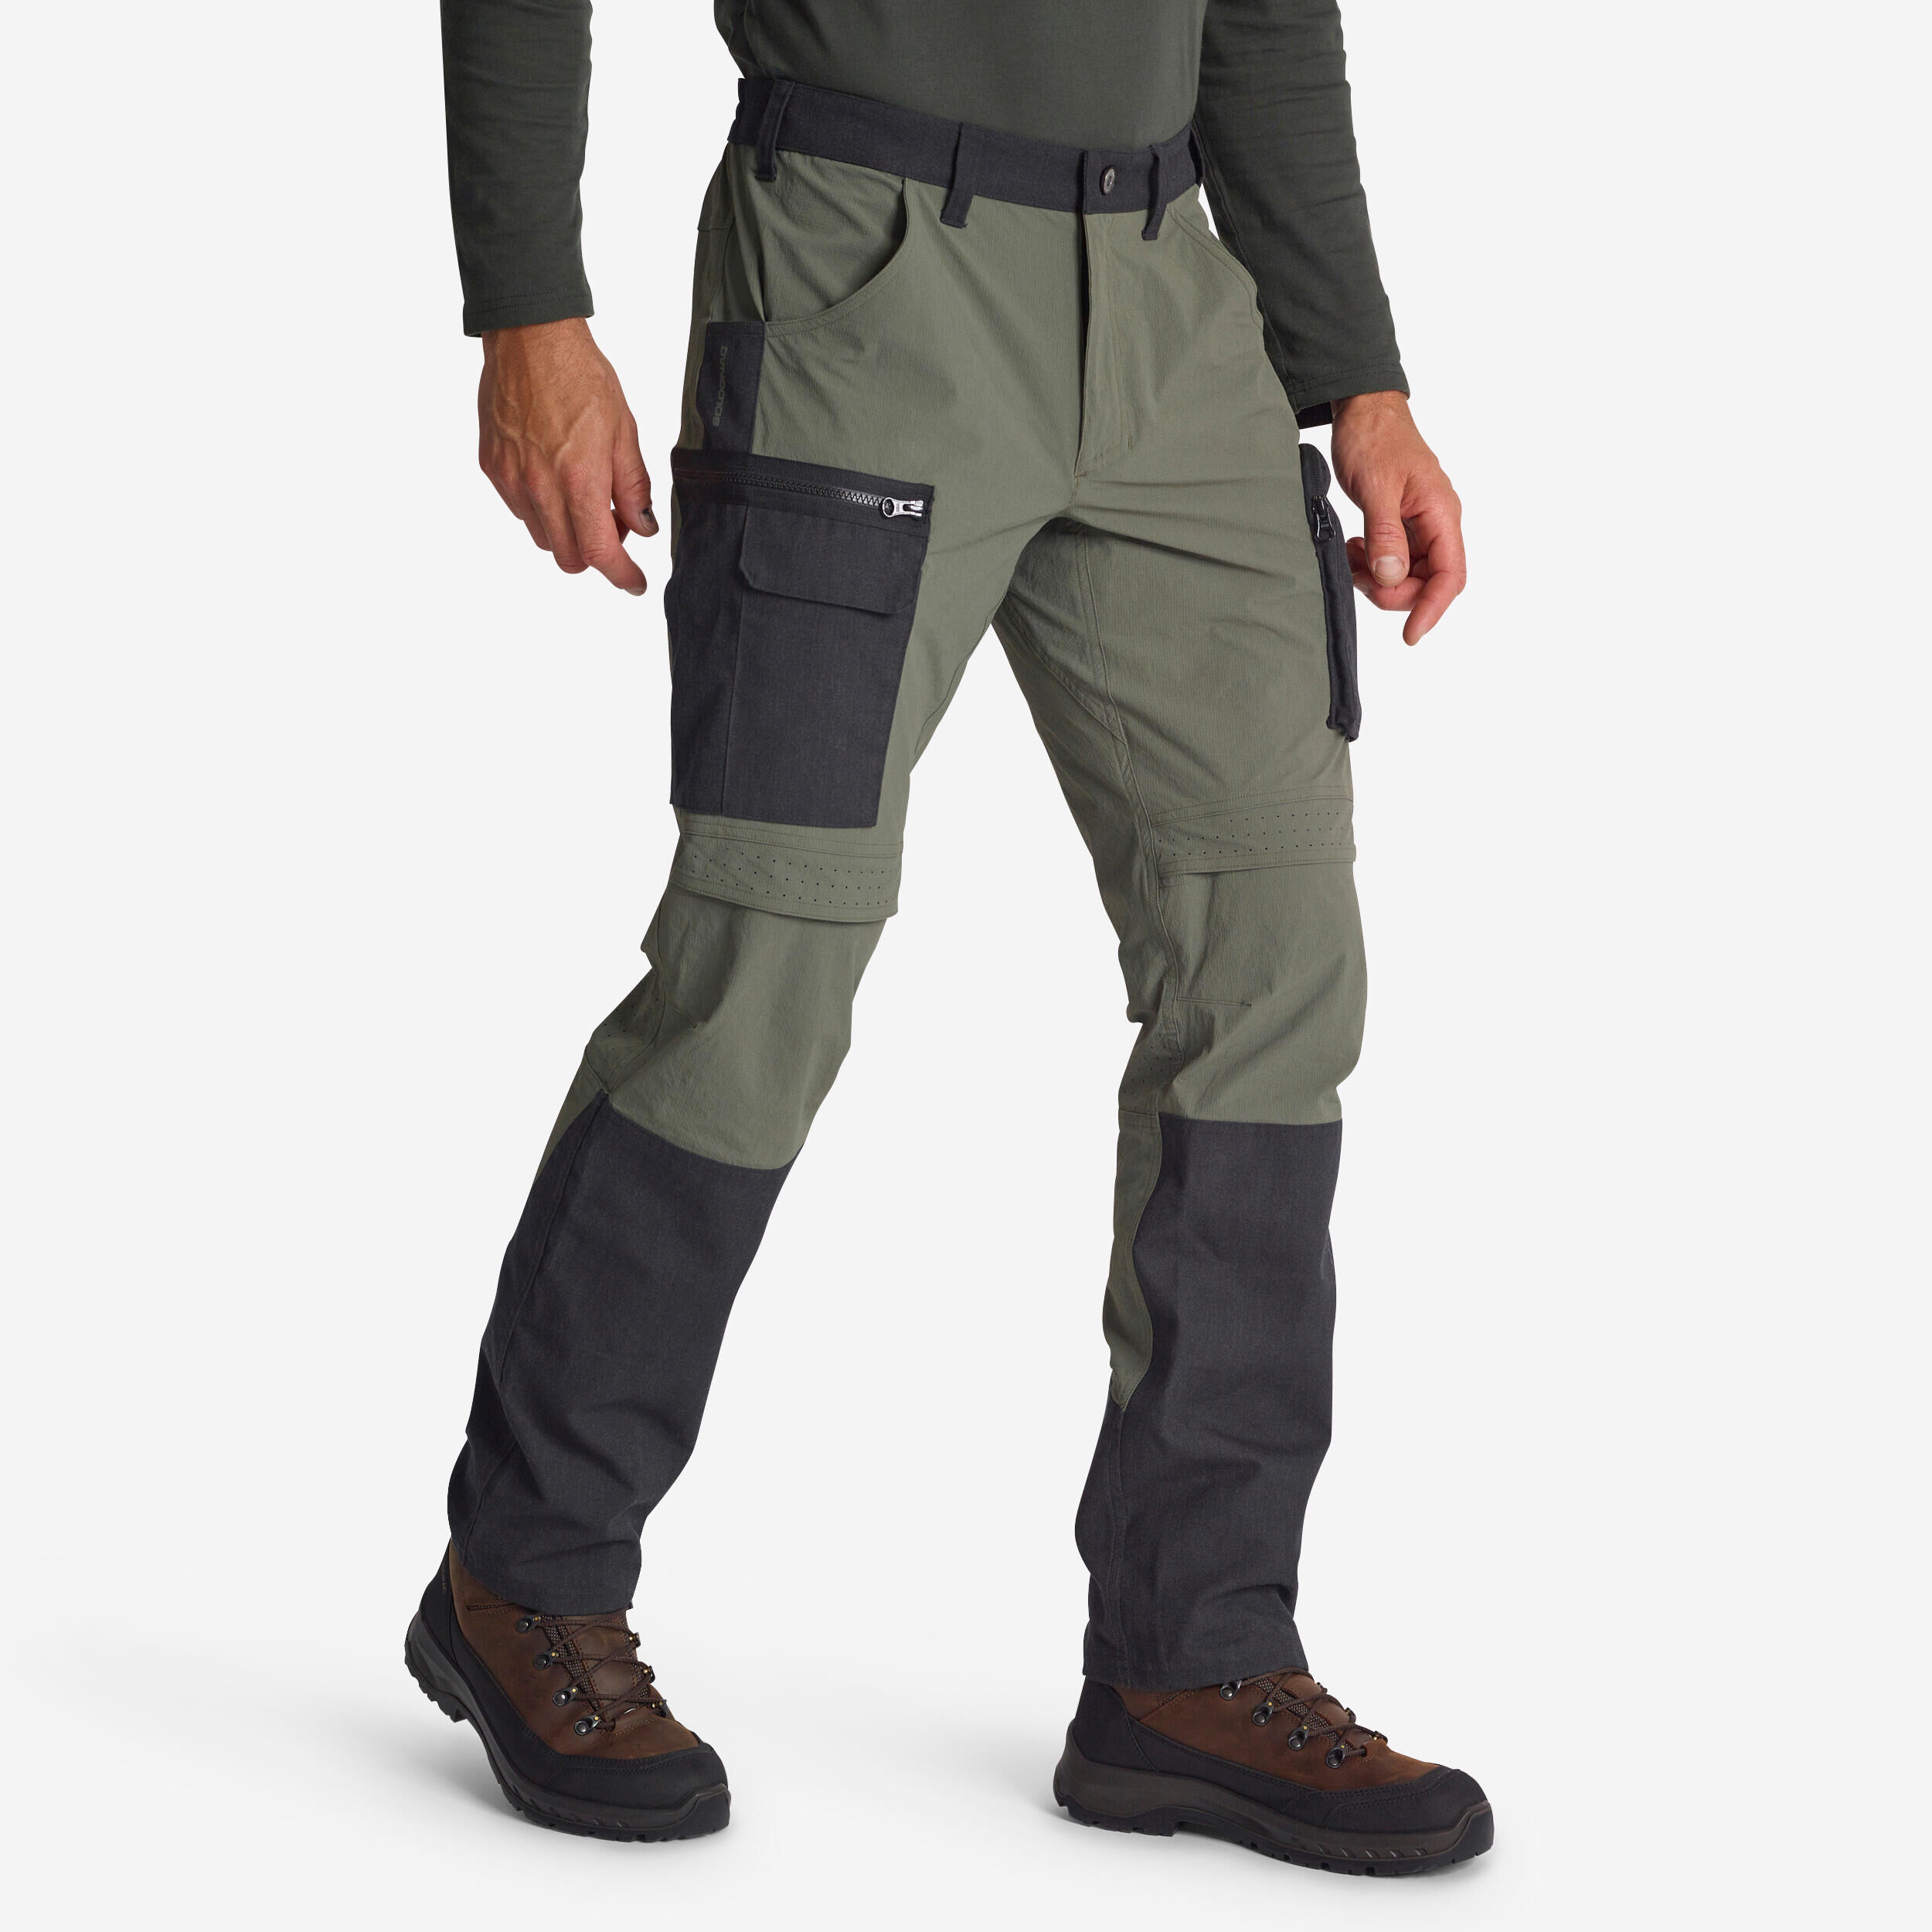 SOLOGNAC 900 Lightweight Breathable Country Sport Trousers - Green